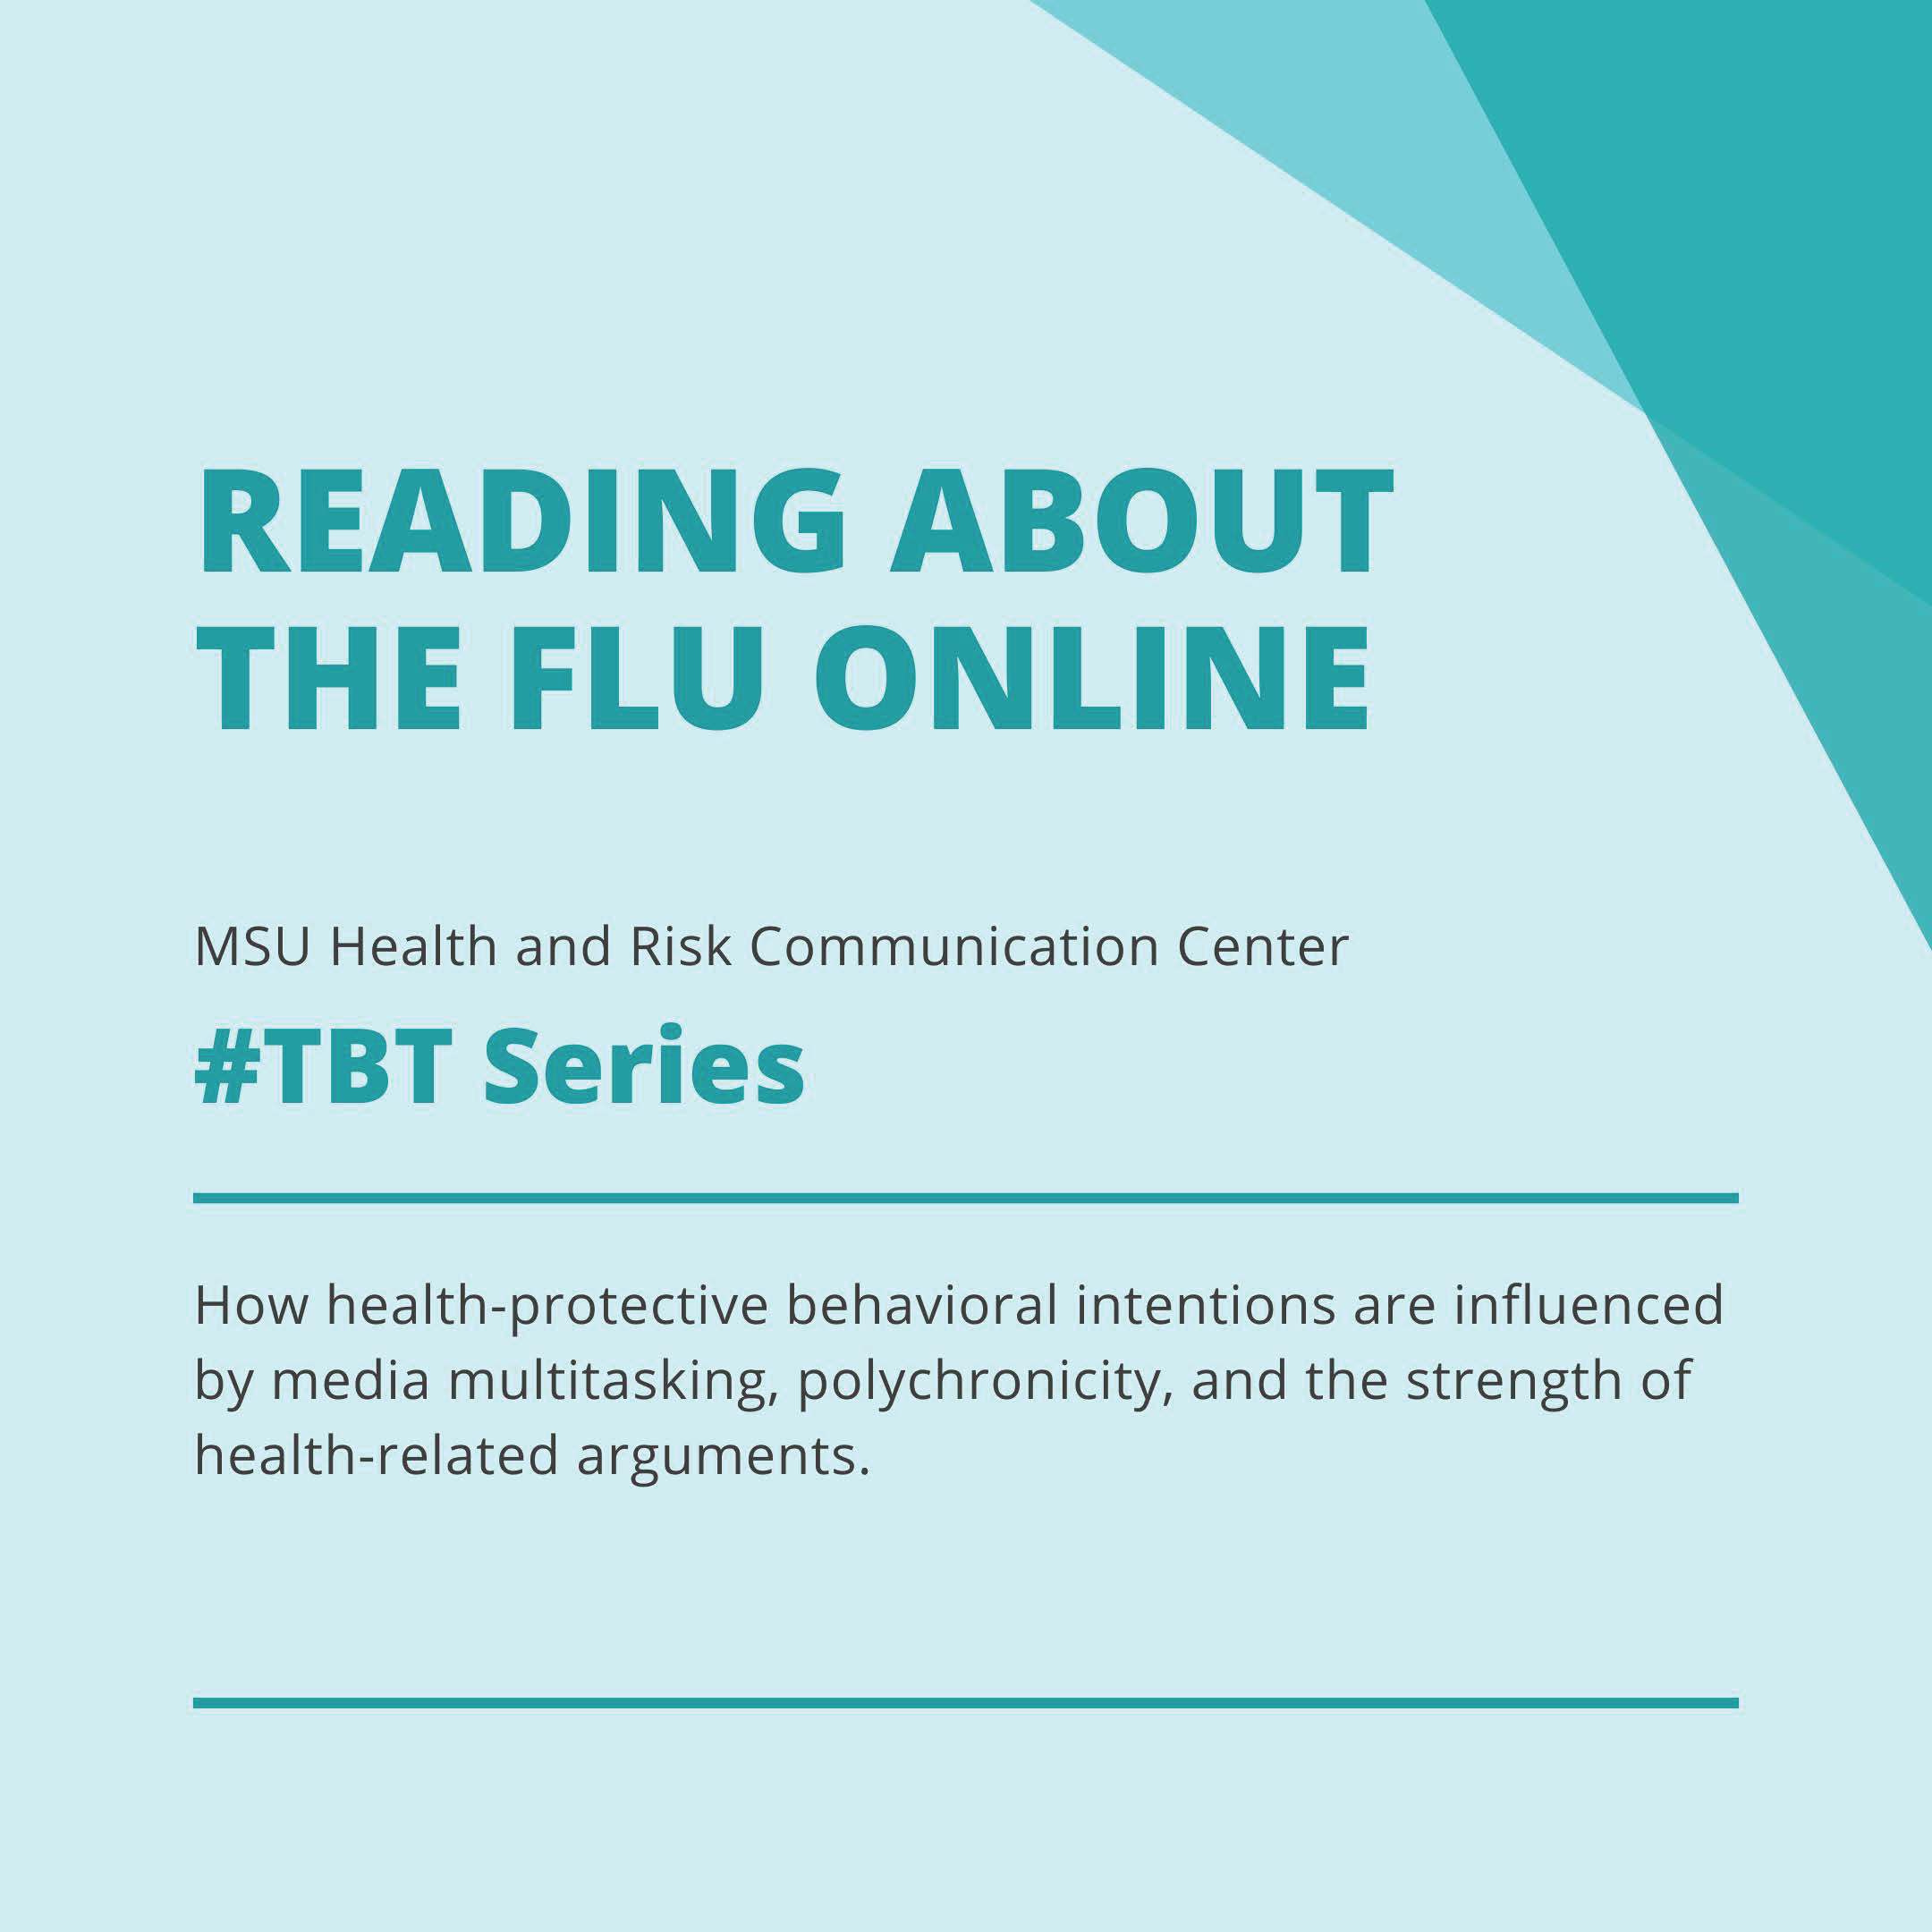 Reading About the Flu Online: How Health-Protective Behavioral Intentions Are Influenced byMedia Multitasking, Polychronicity, and Strength of Health-Related Arguments